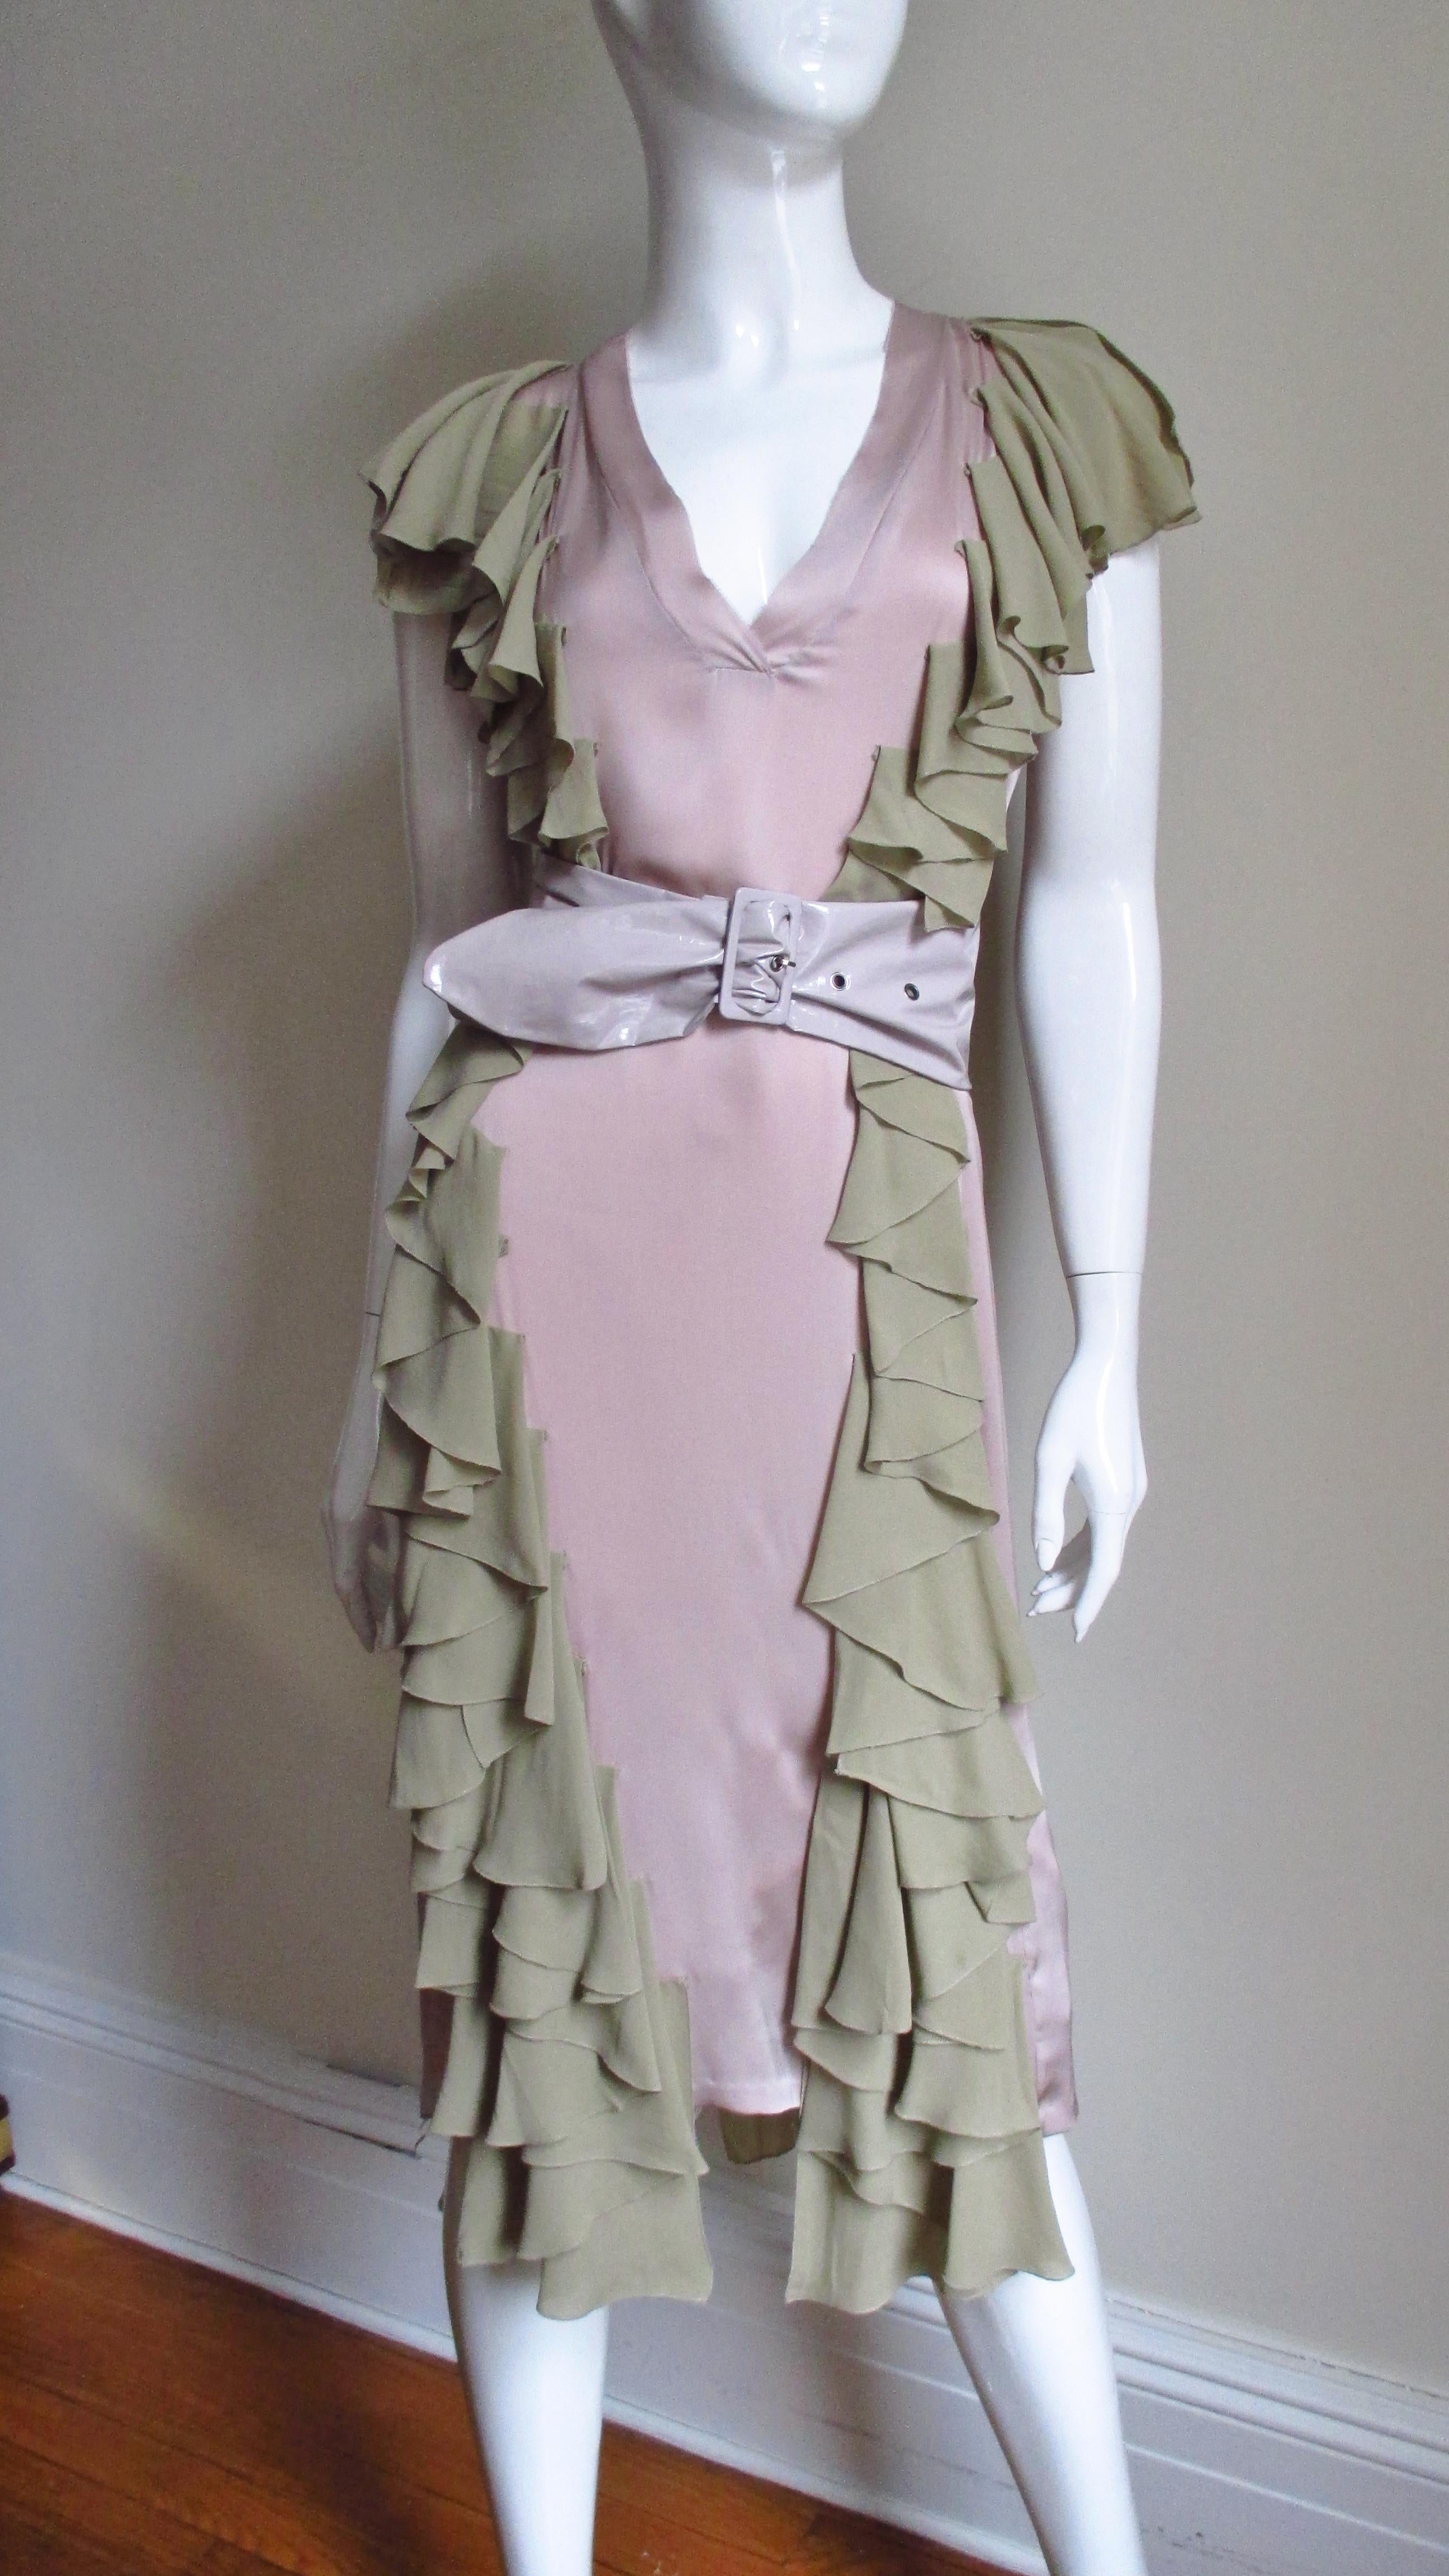 A very pretty feminine dress in soft pink silk charmeuse with pale olive ruffles from Stella McCartney.  The color combination is beautiful.  It is a simple dress enhanced with ruffles down the entire length of the dress on each side of the front